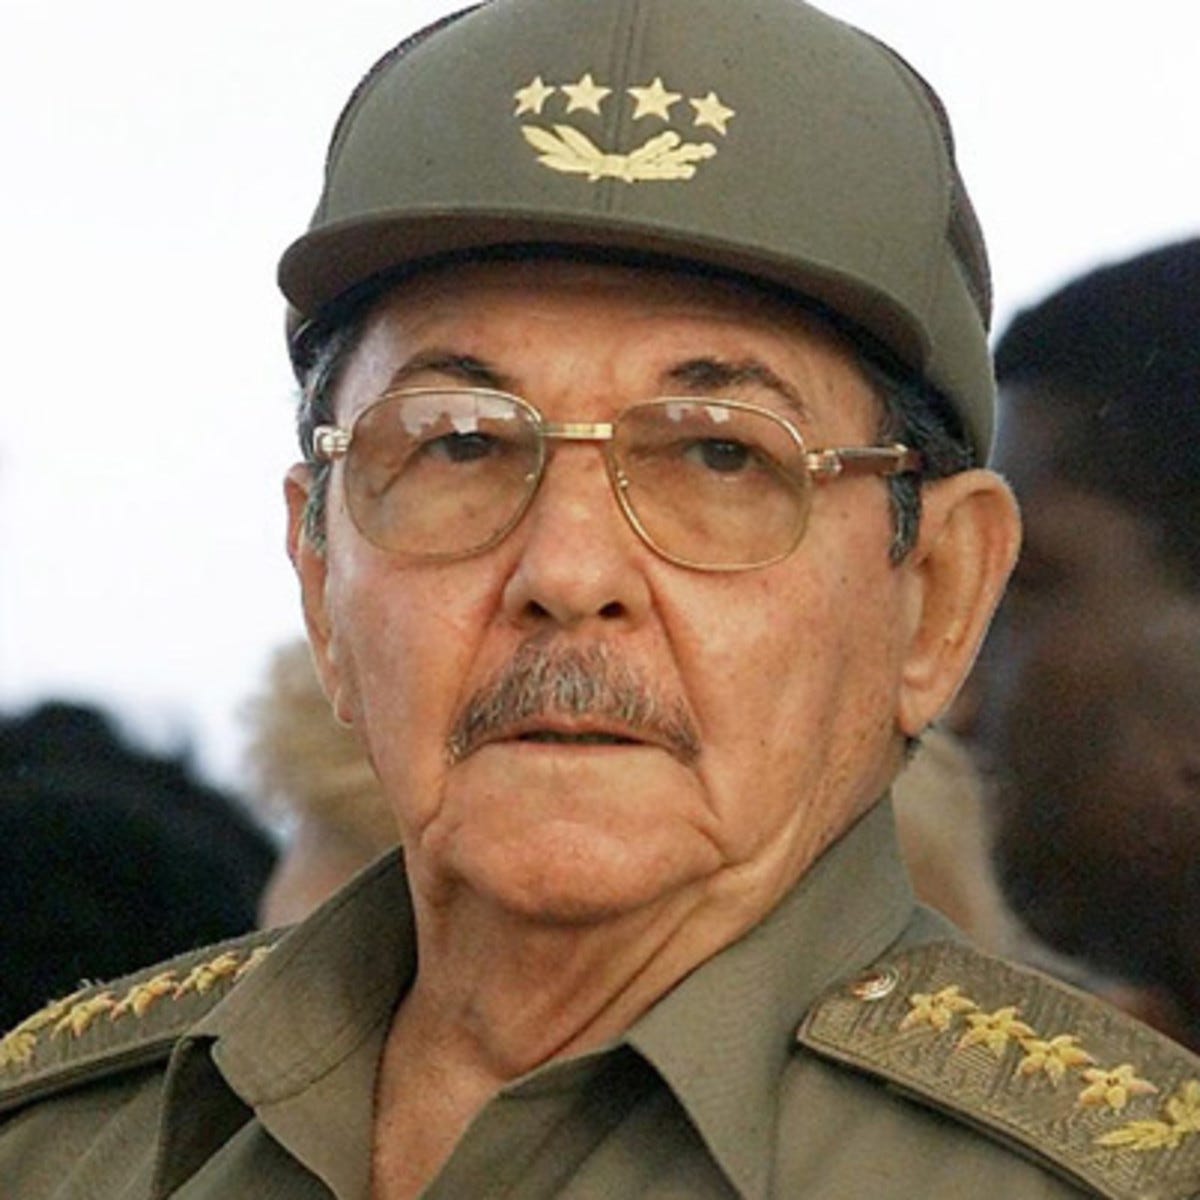 Raul Castro - Cuban Revolution, Age & Brother - Biography